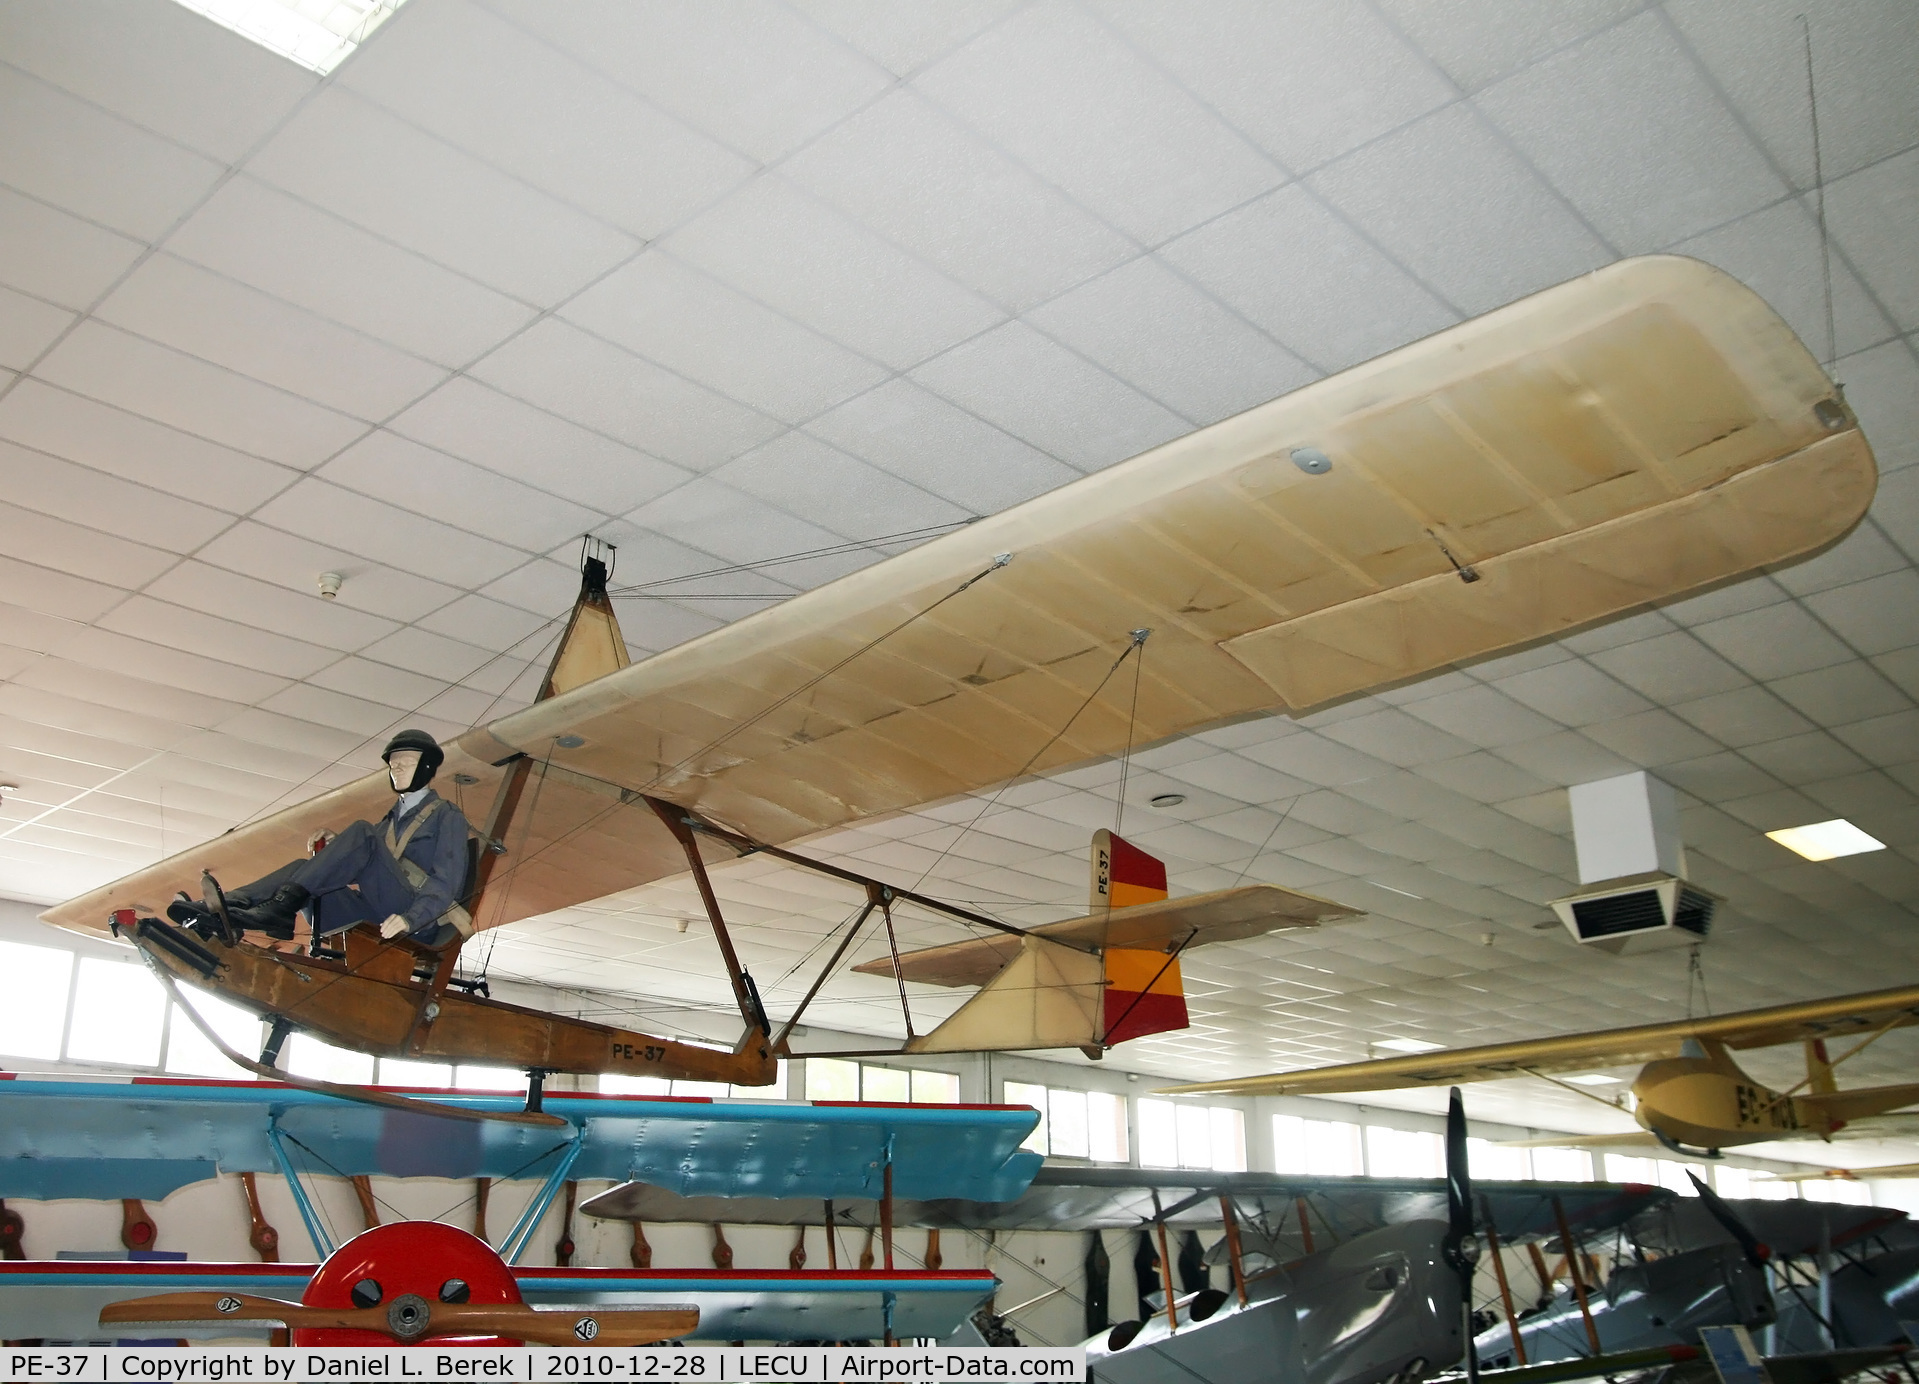 PE-37, DFS SG-38 Schulgleiter C/N Not found PE-37, Interesting training glider at the Museo del Aire.  The museum has another example, unrestored, revealing the complex skeletal framework of the wings.